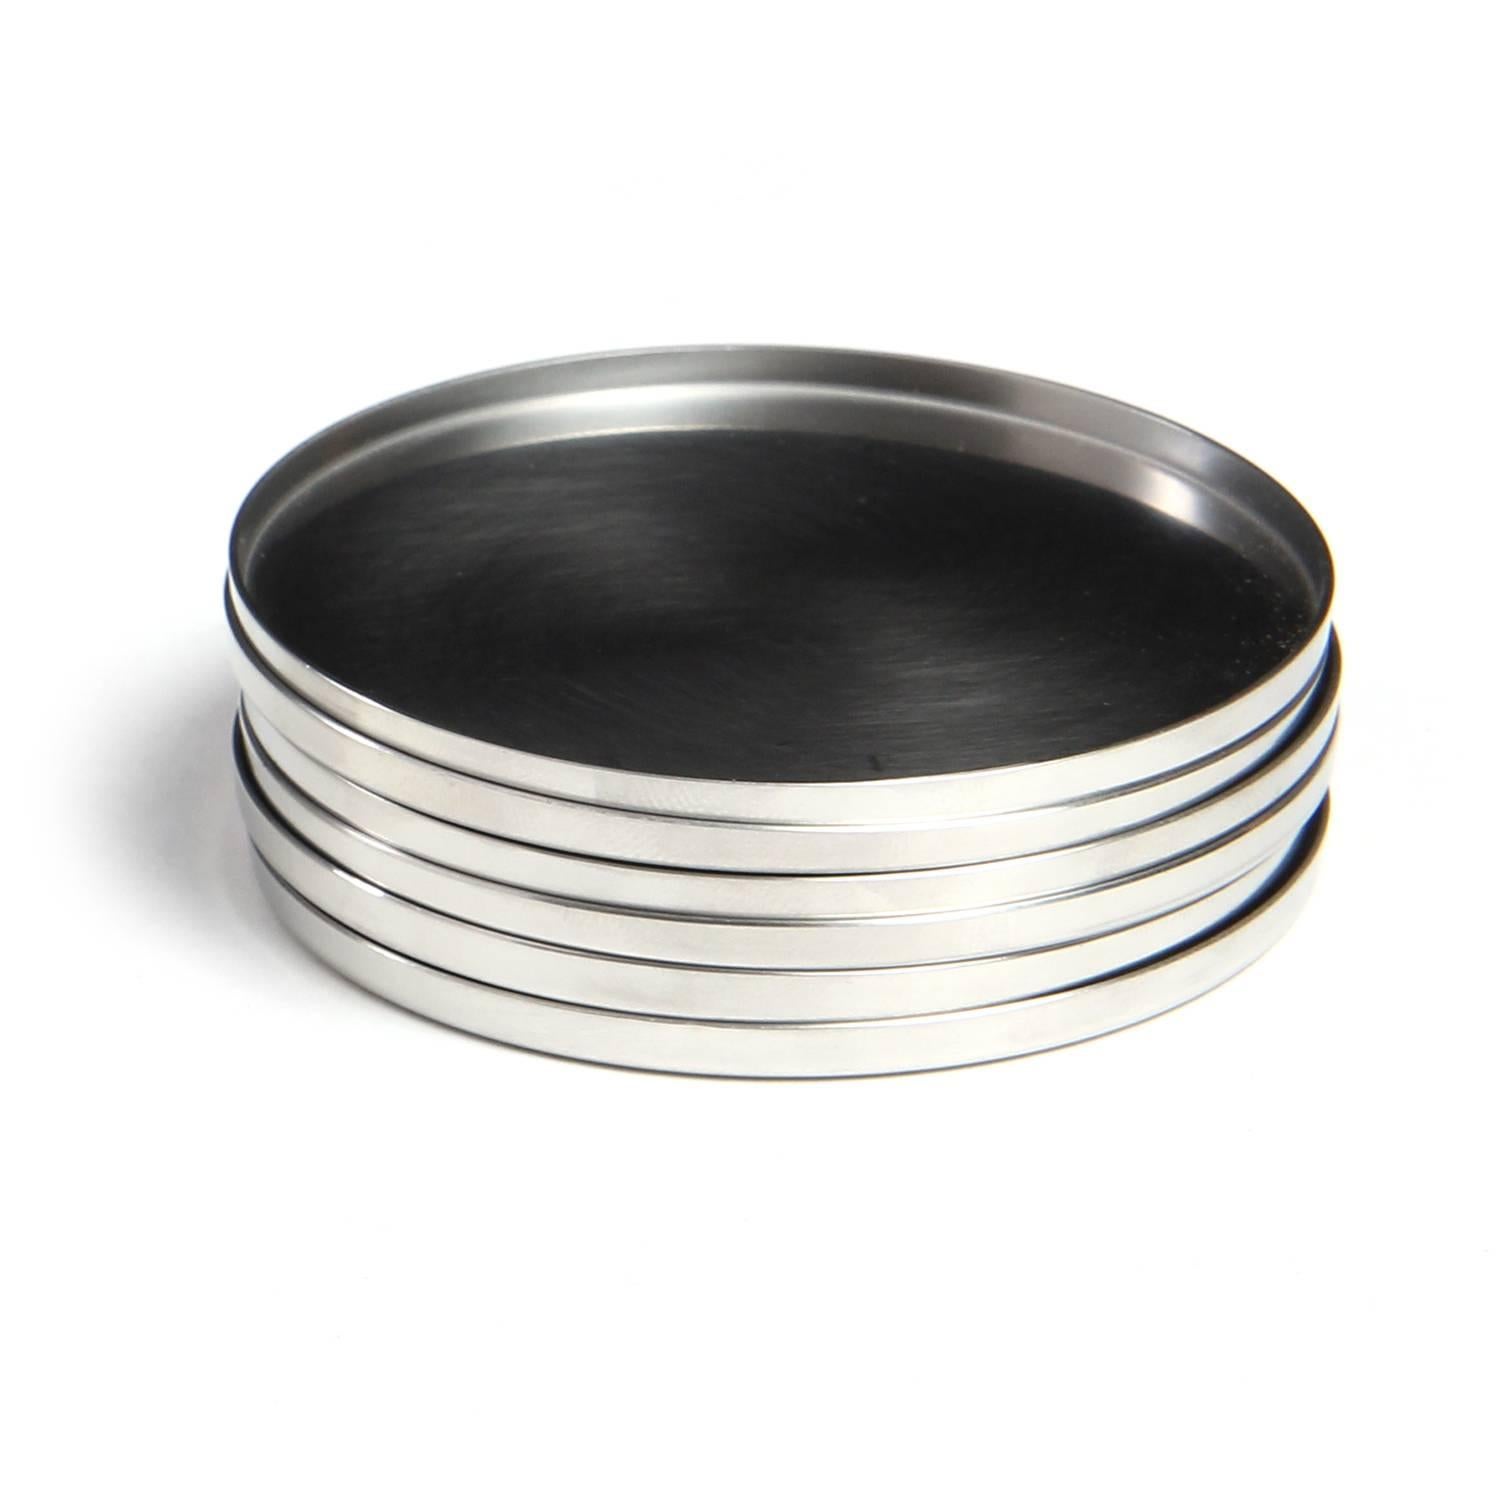 A grouping of six spare and superb brushed stainless steel coasters from the 